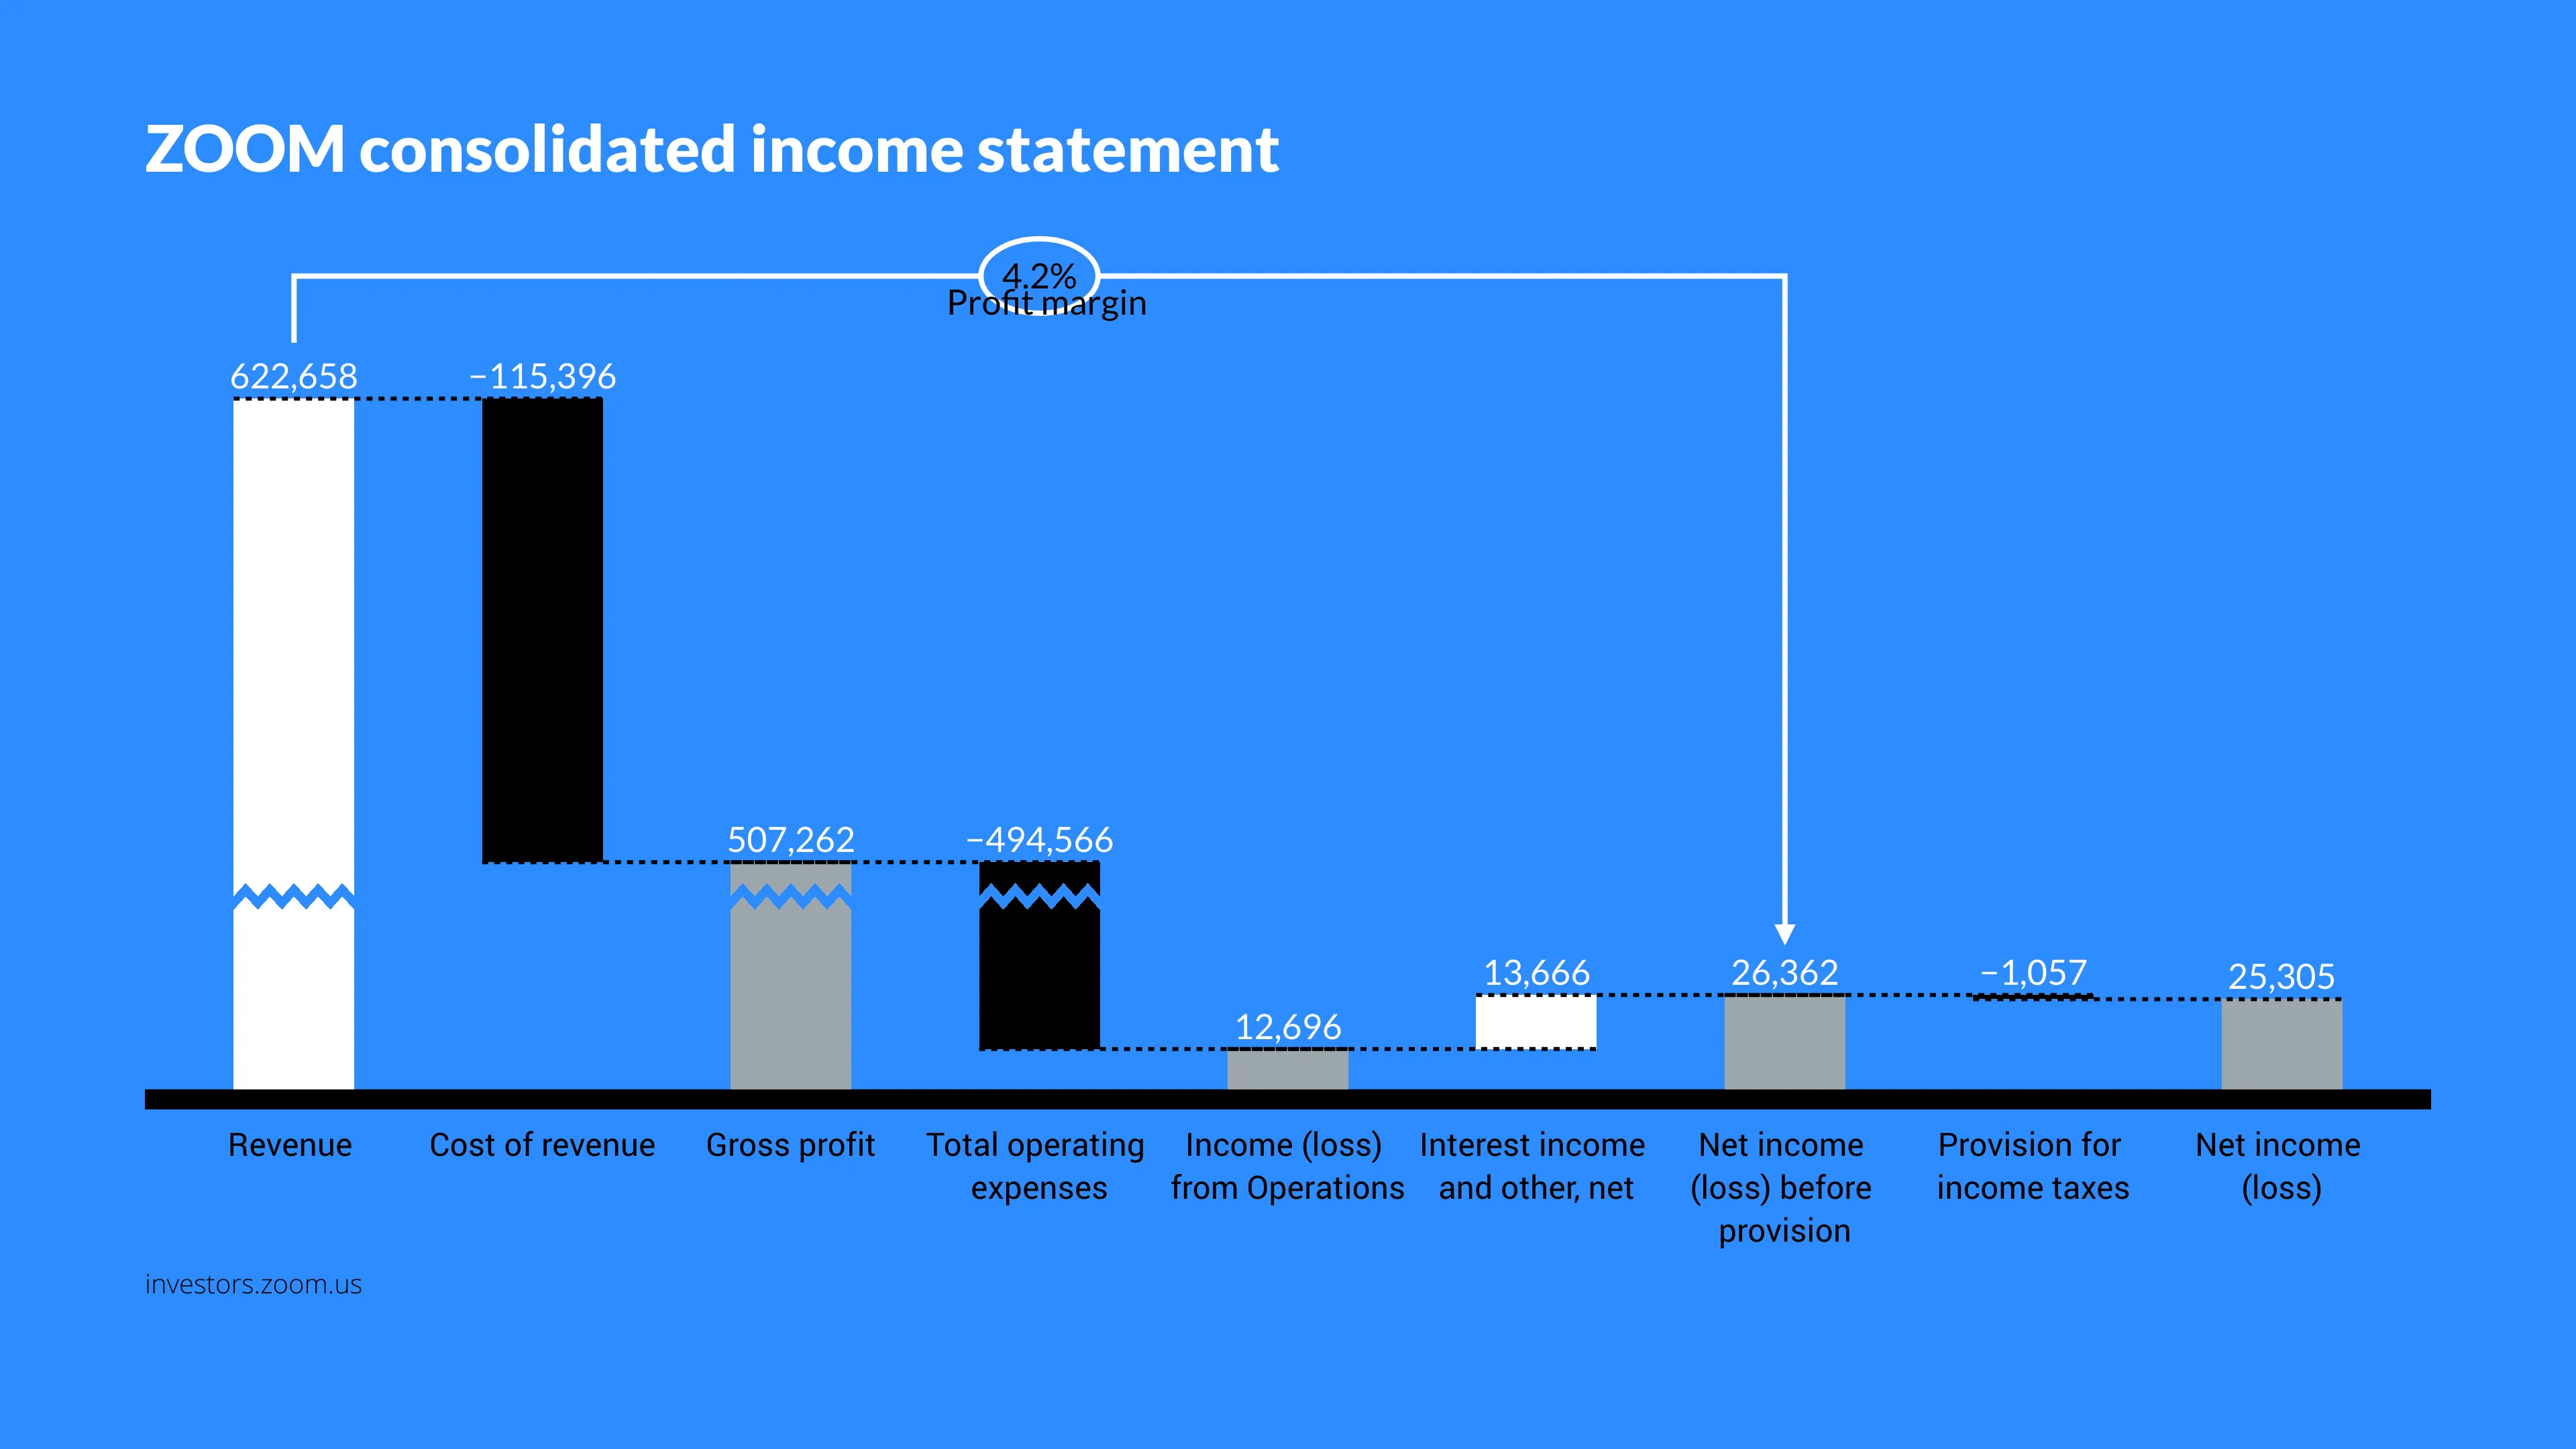 ZOOM consolidated income statement